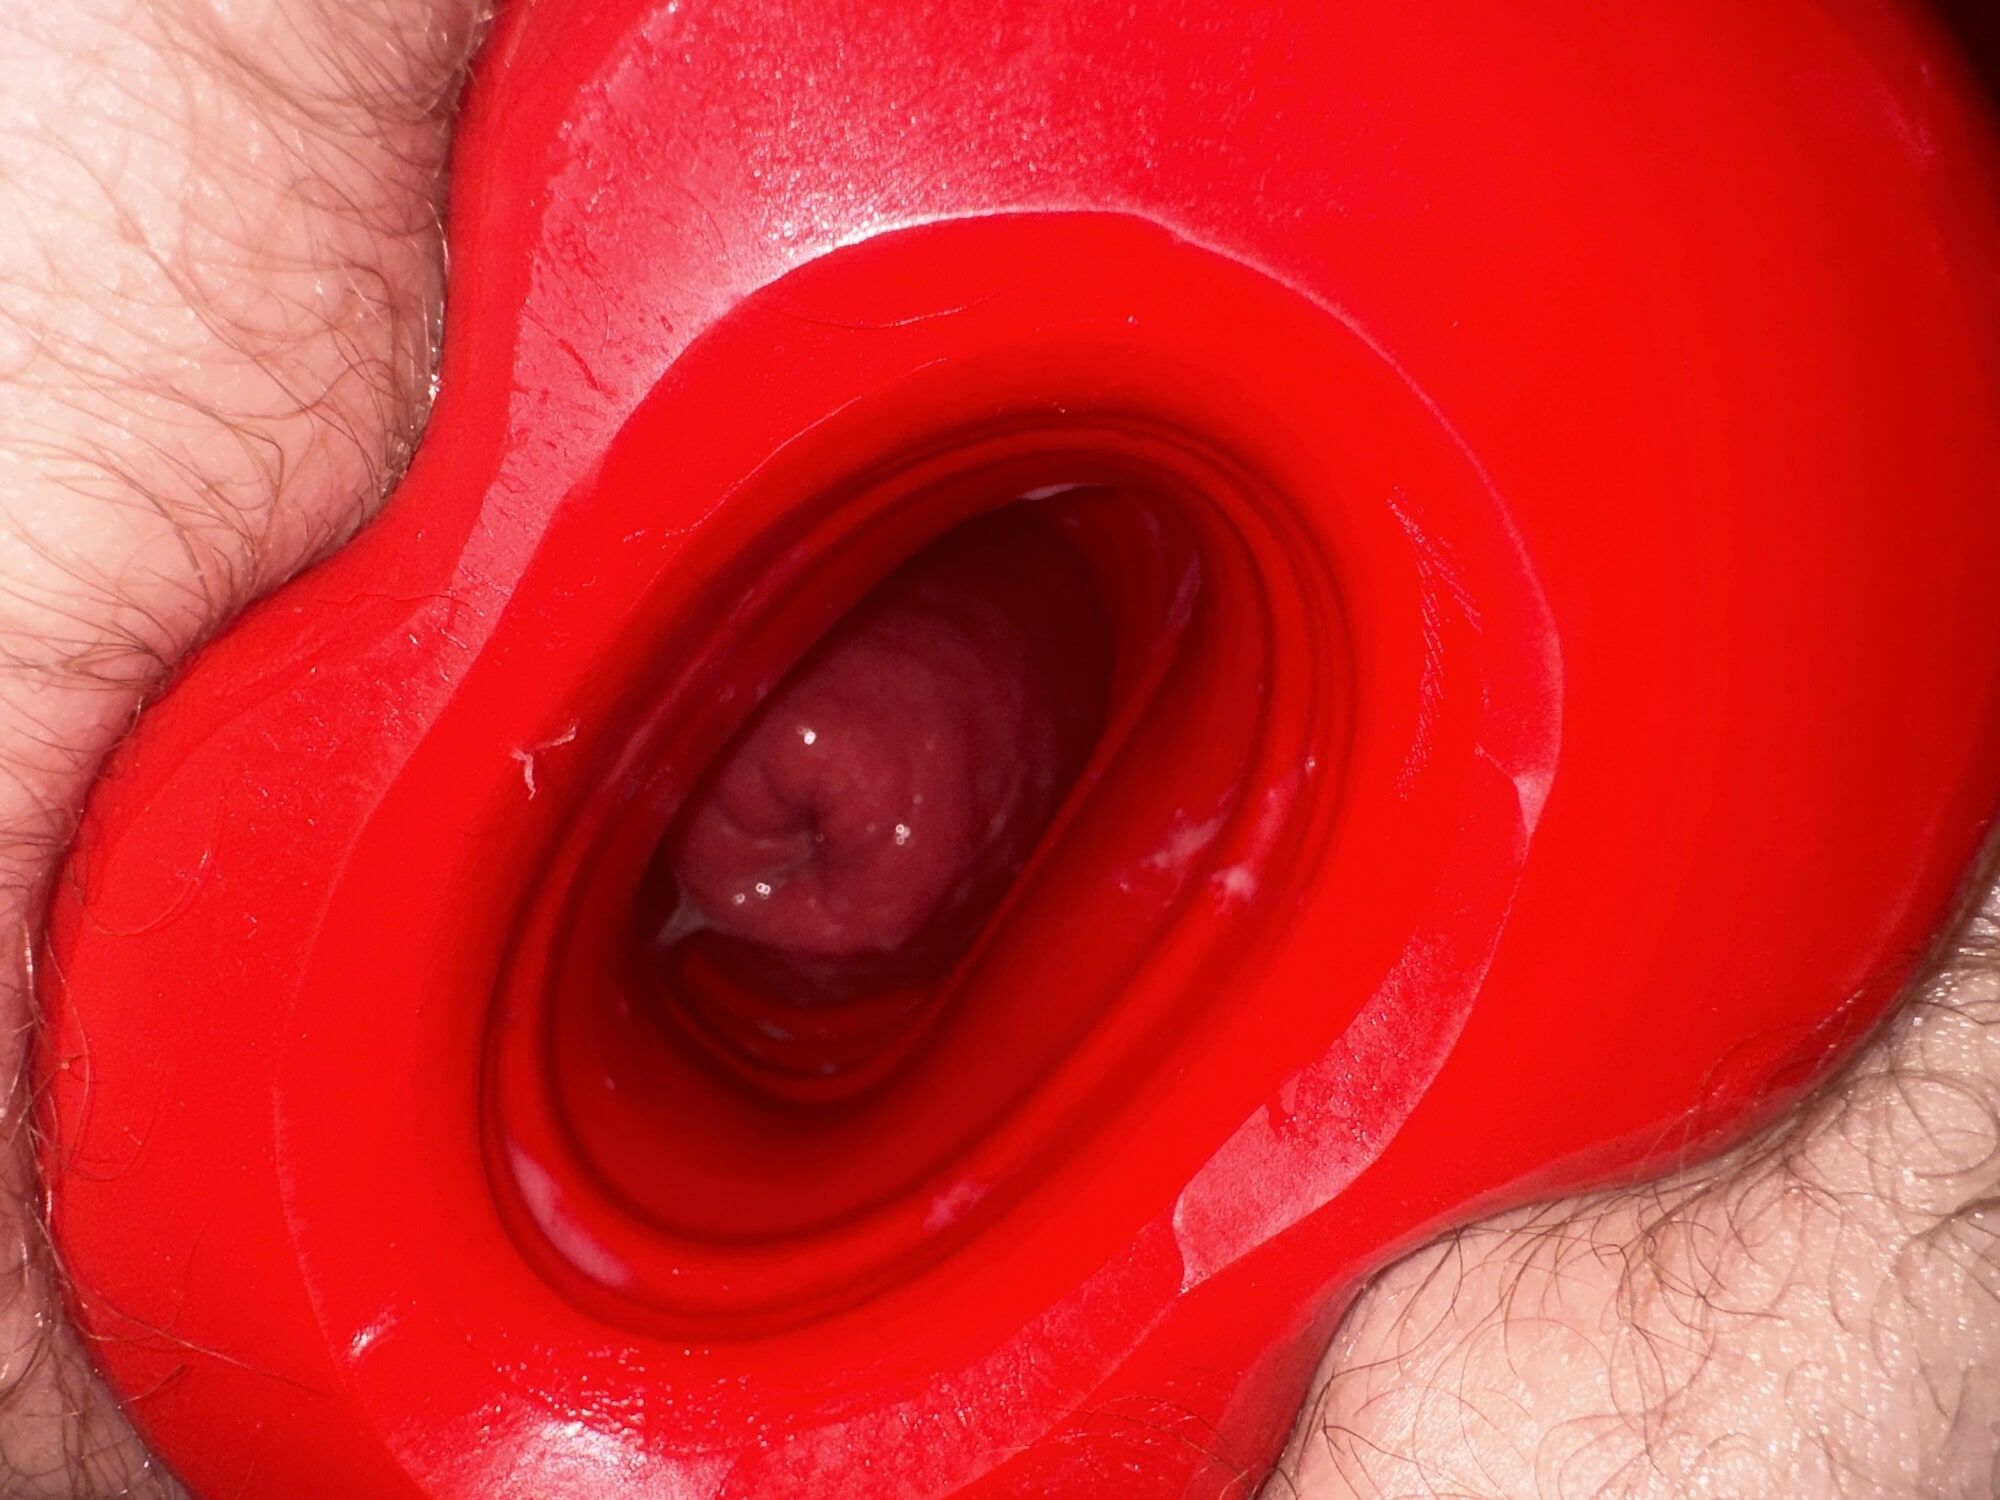 Anal prolapse in oxball ff pighole #9